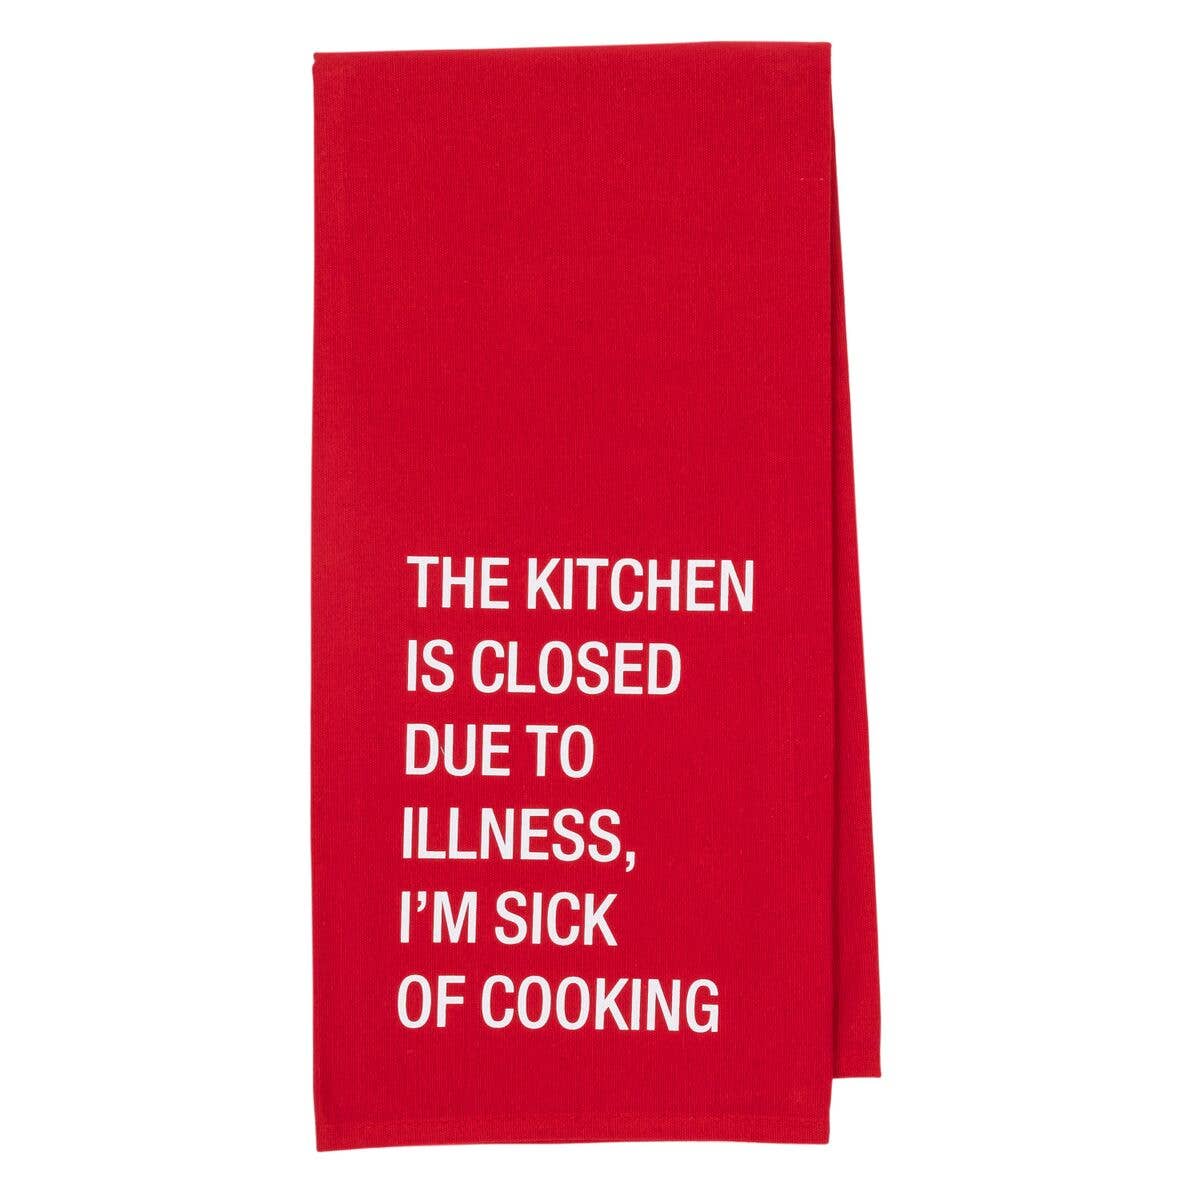 Kitchen Is Closed Due To Illness, I'm Sick of Cooking Tea Towel | Funny Kitchen Dish Towel in Red